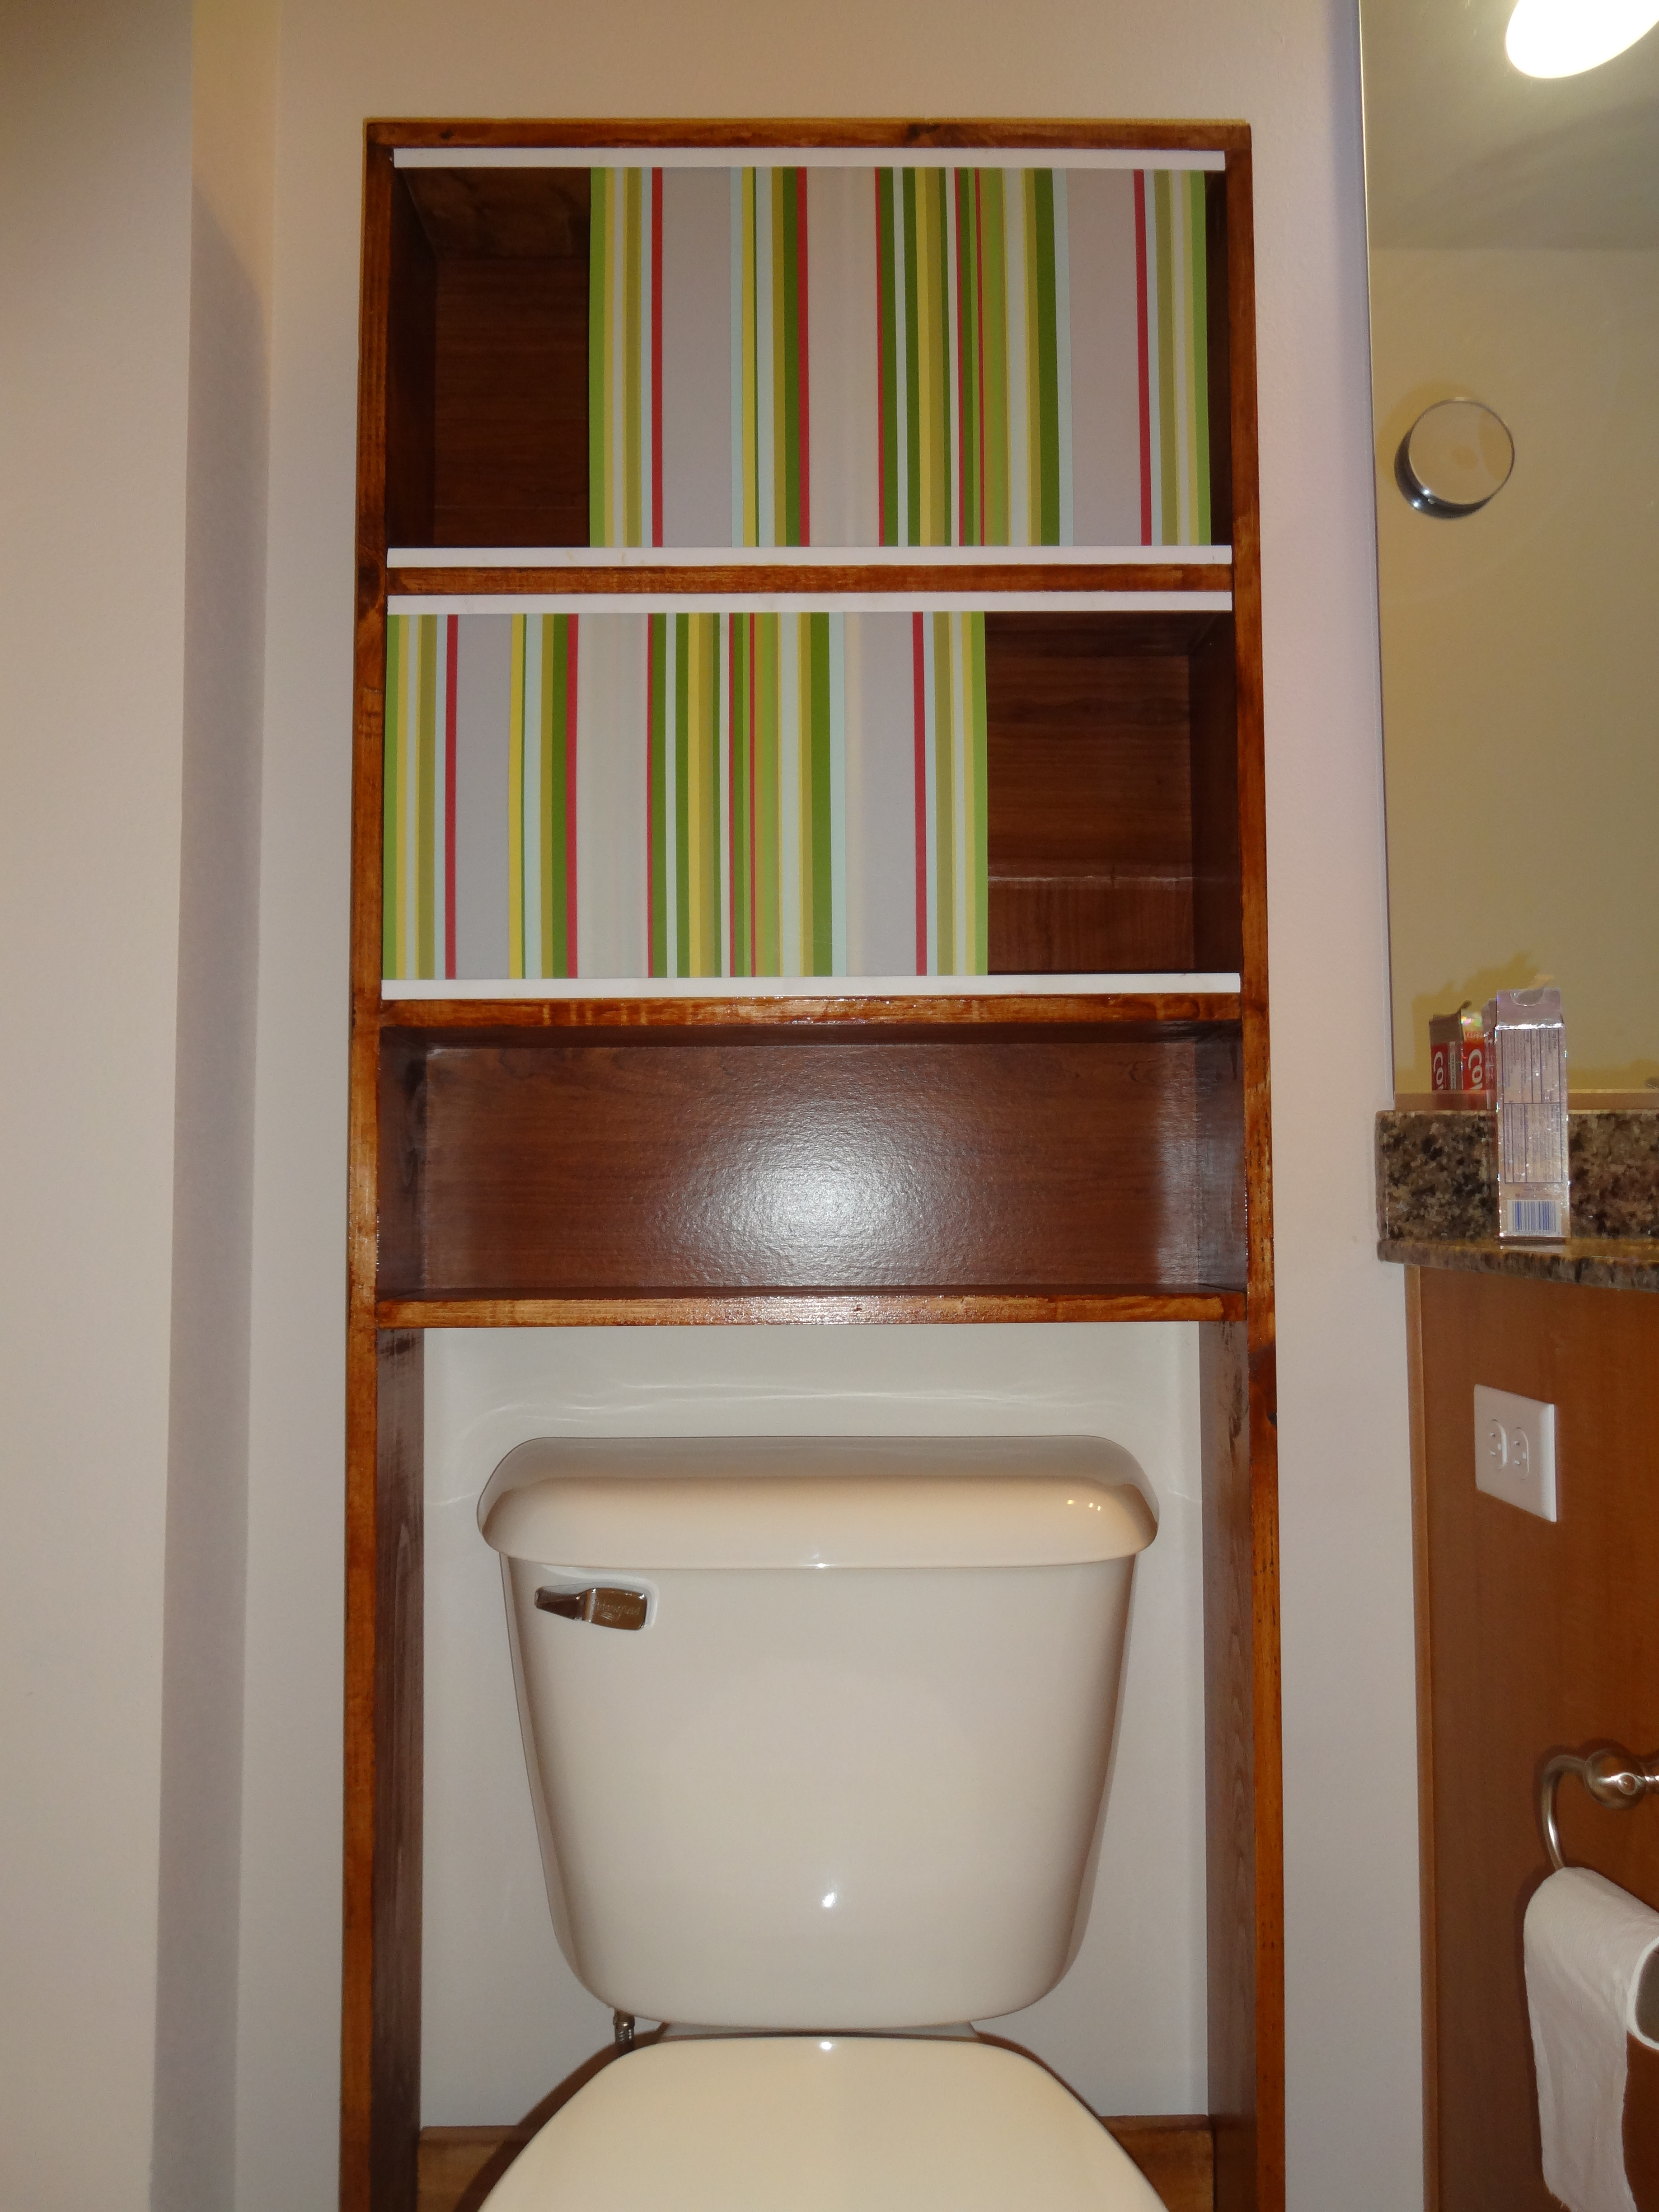 Best ideas about DIY Over The Toilet Storage
. Save or Pin Ana White Now.